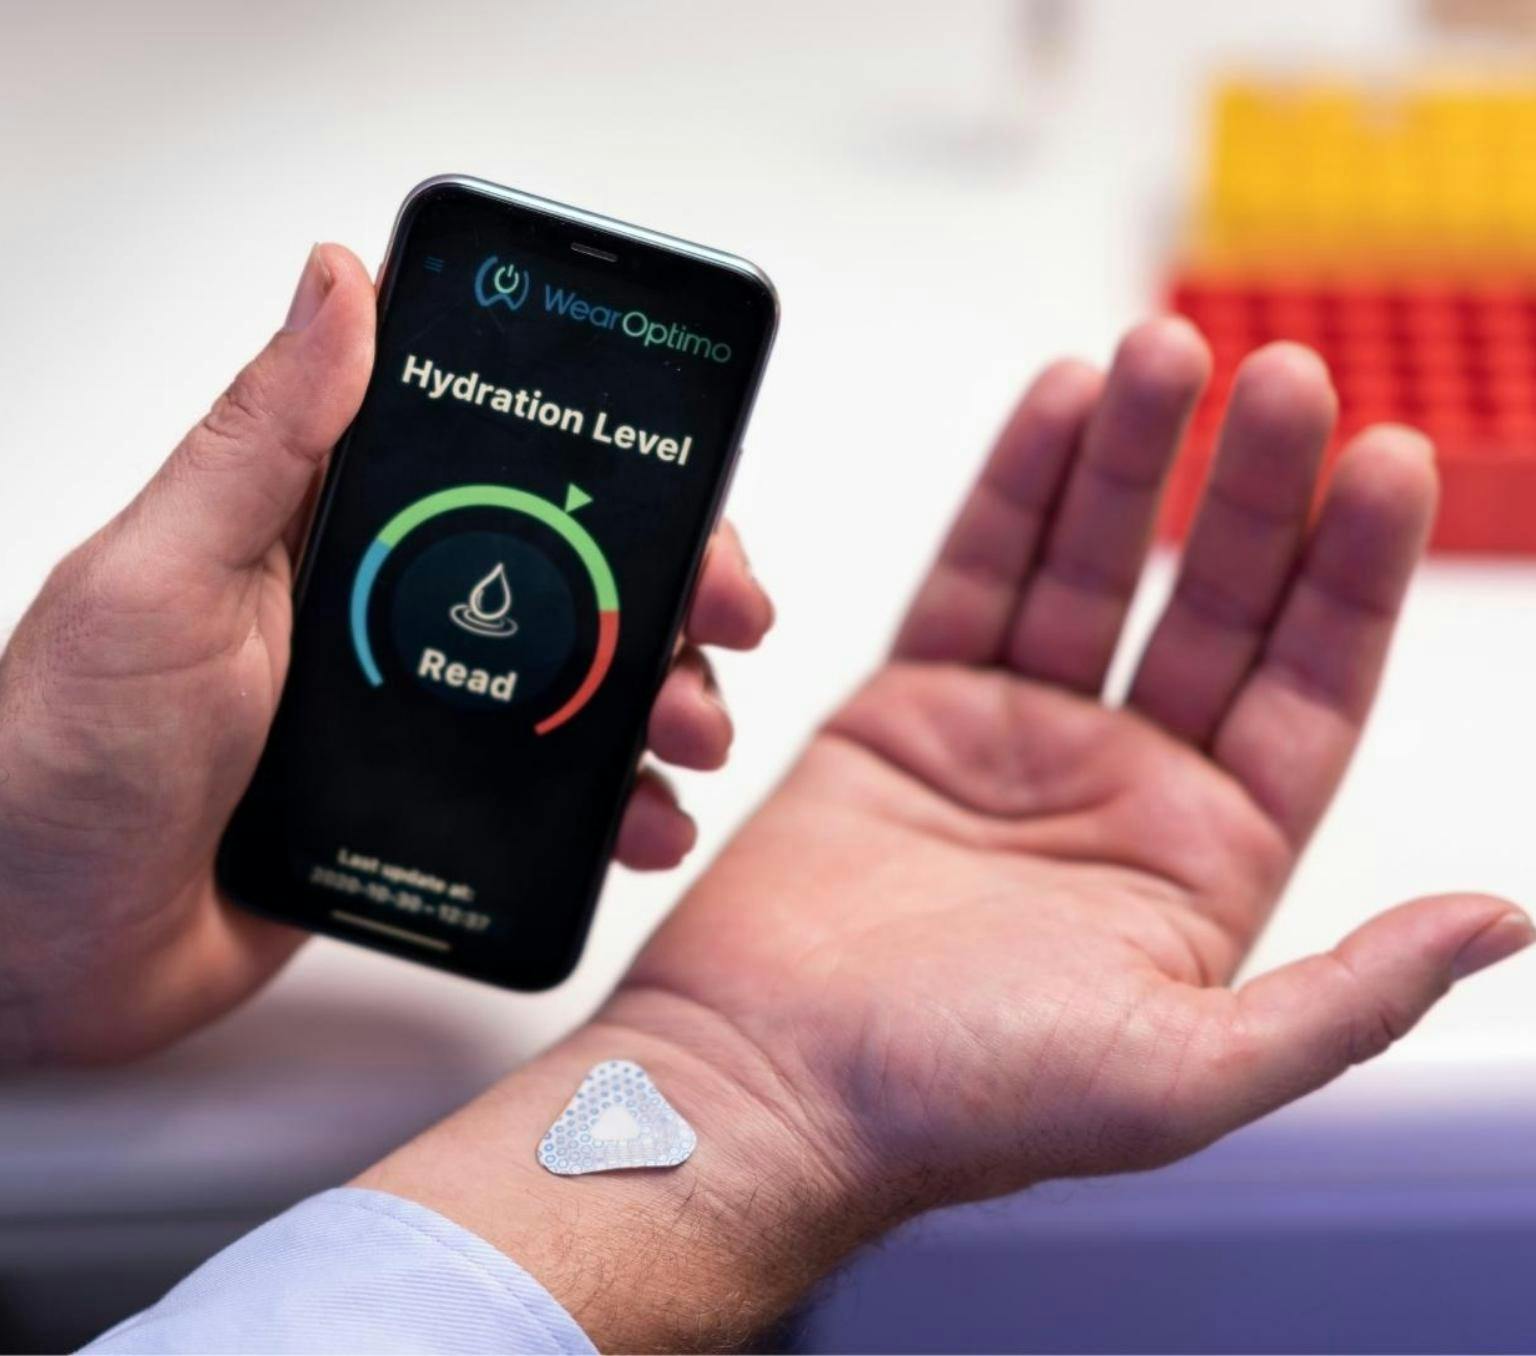 close-up of a persons hand. they are holding a smart phone which displays a dehydration level barometer in their left hand. Their right hand is facing palm up and a small triangle sticker is placed on their right wrist. The sticker is the Wearoptimo micro sensor.